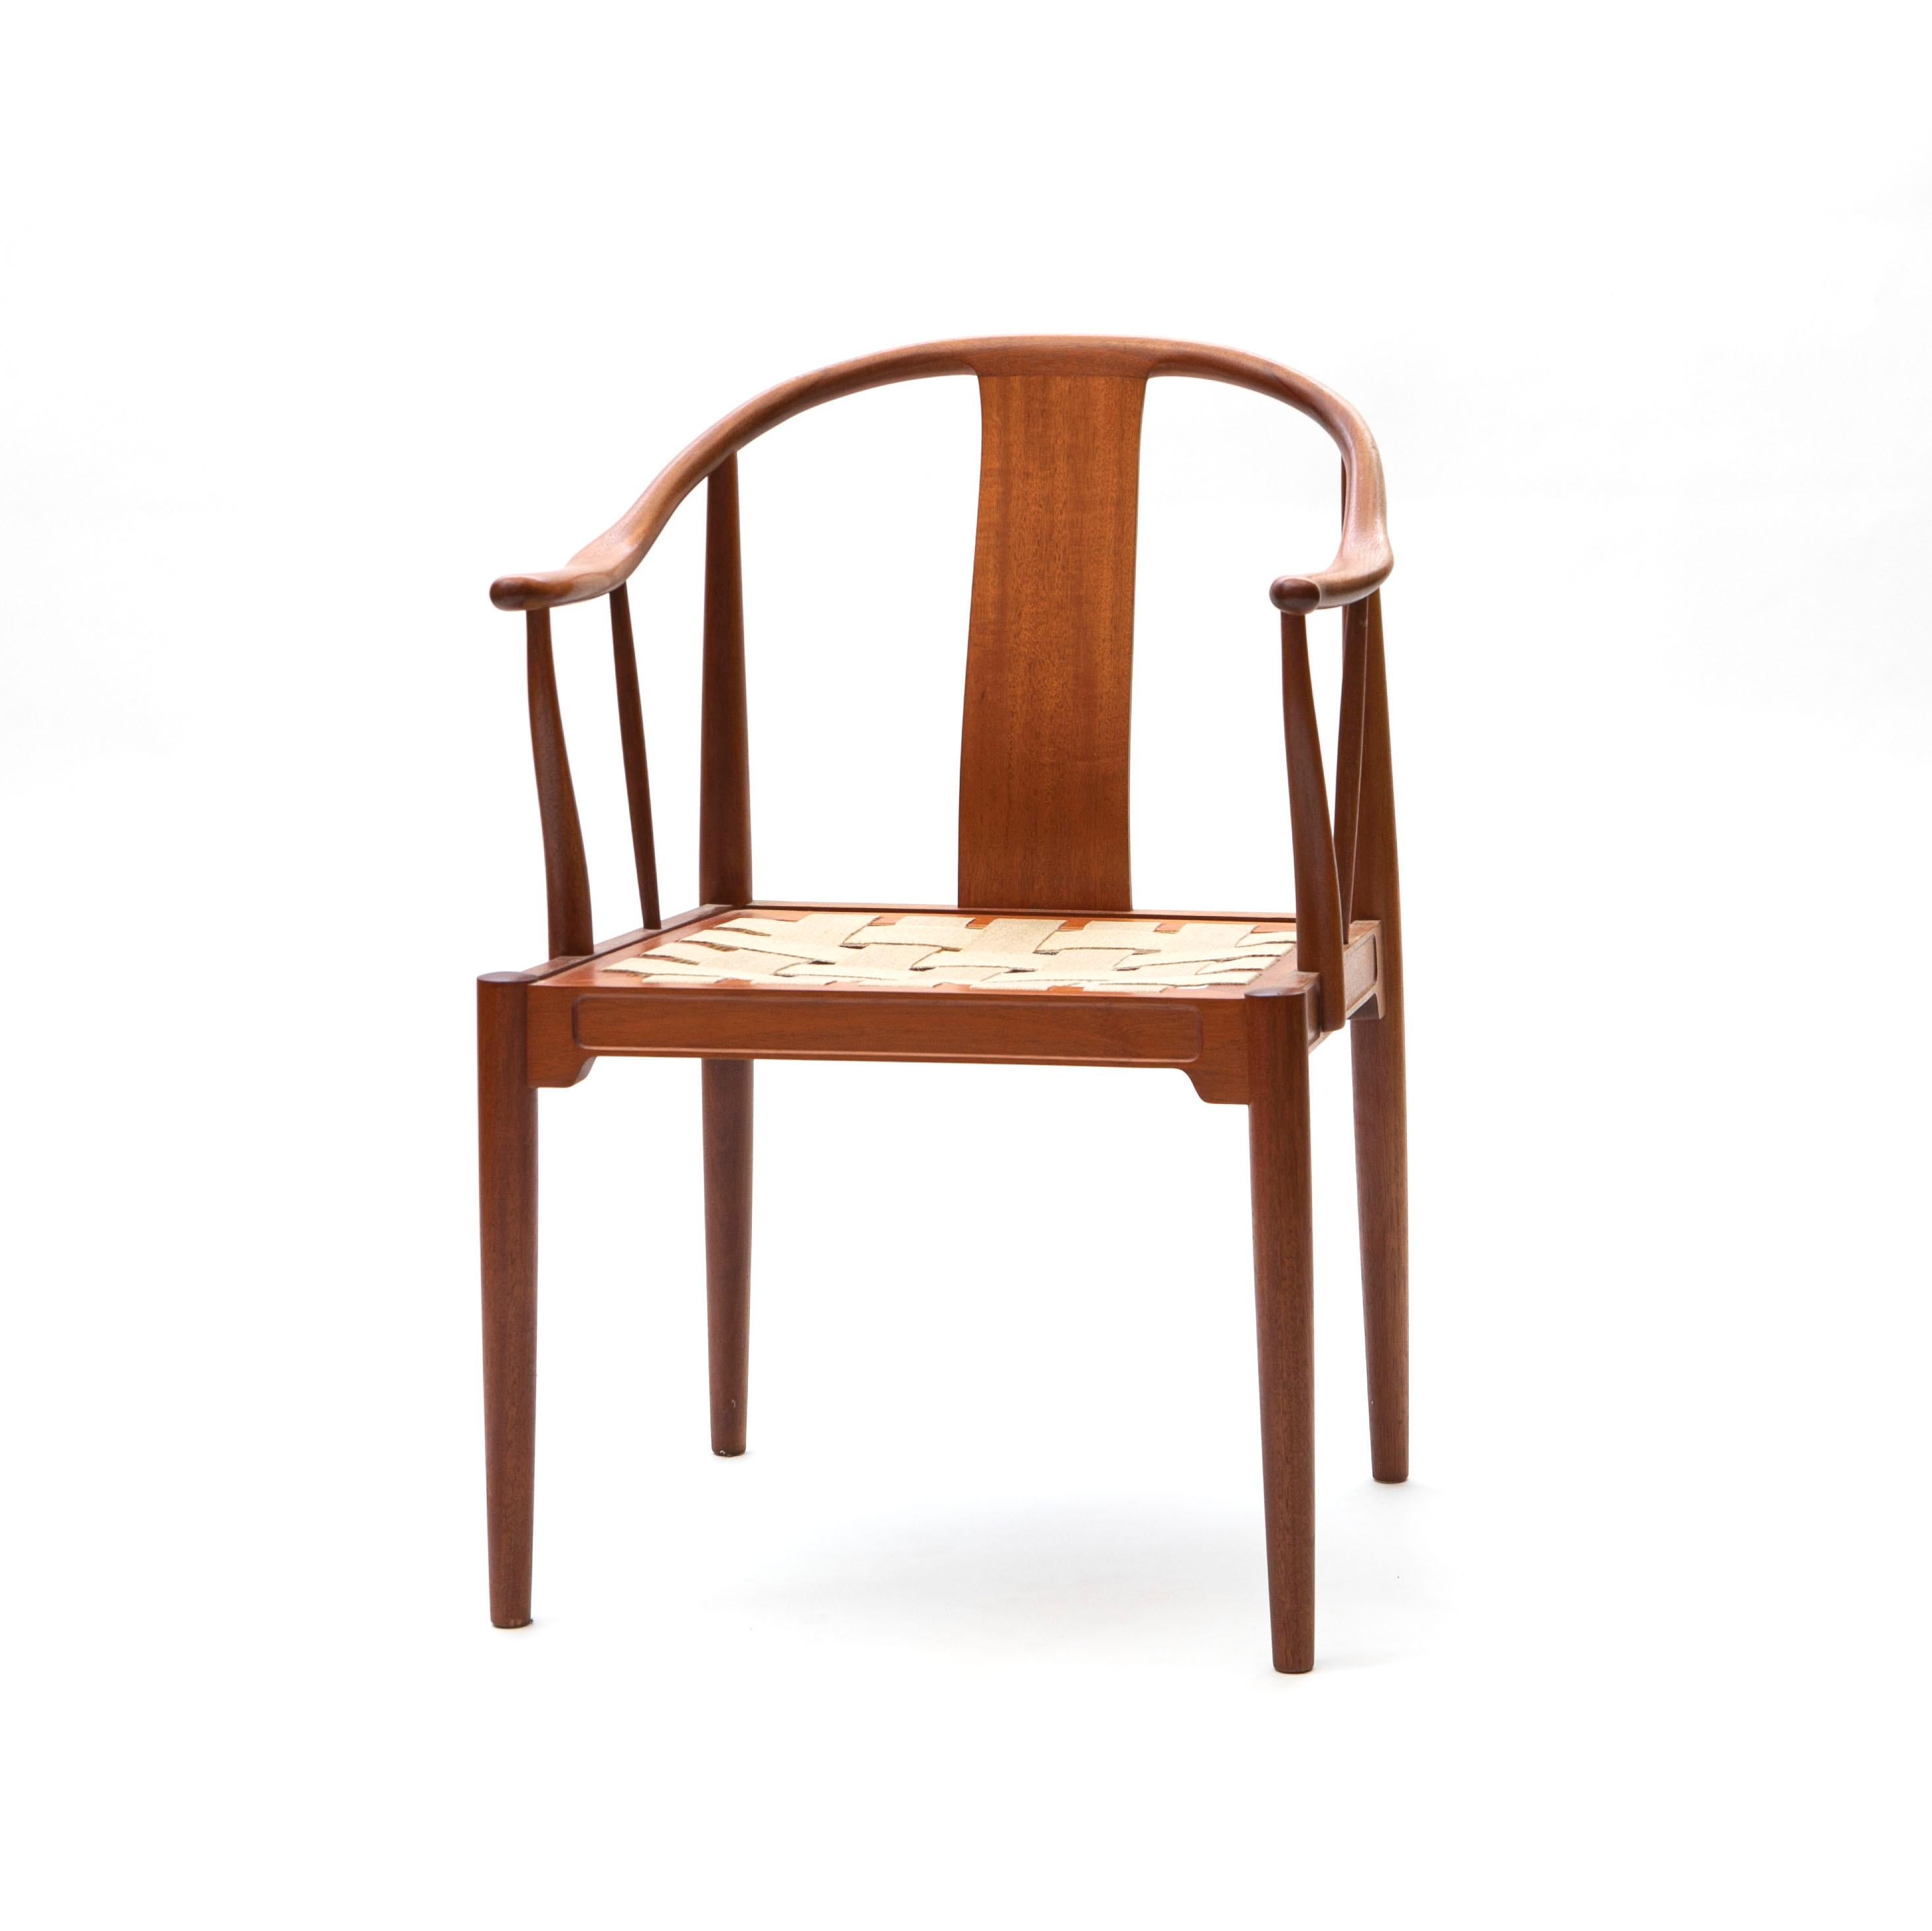 Leather Hans J. Wegner 'China Chair' for Fritz Hansen In Mahogany For Sale